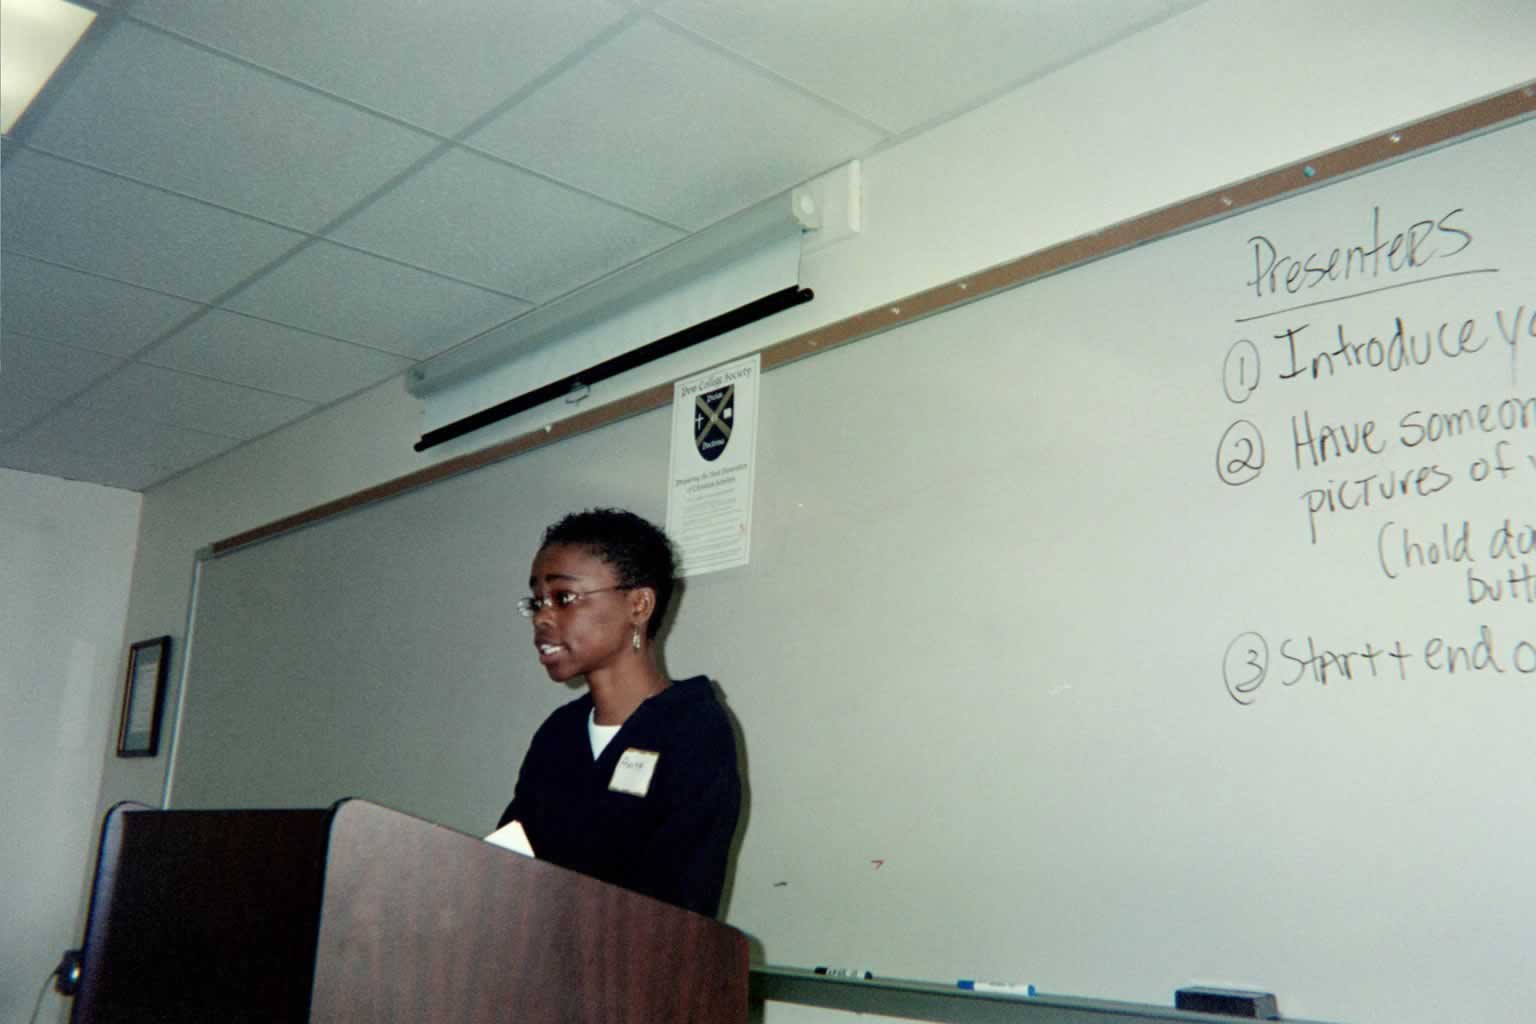 picture of a woman standing behind a podium talking